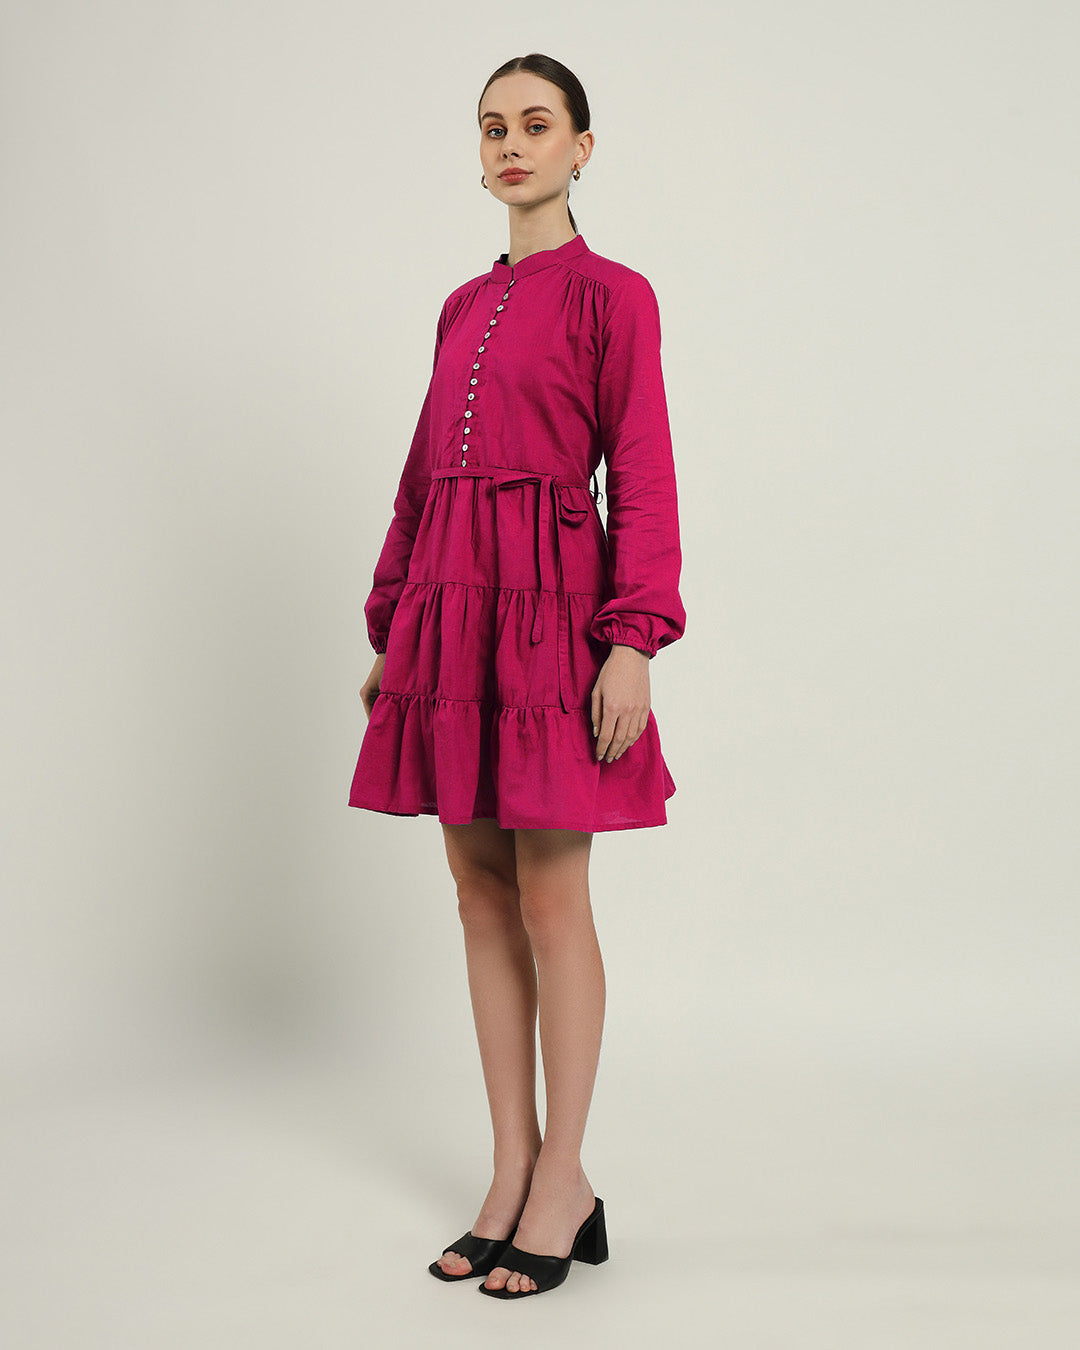 The Ely Berry Cotton Dress